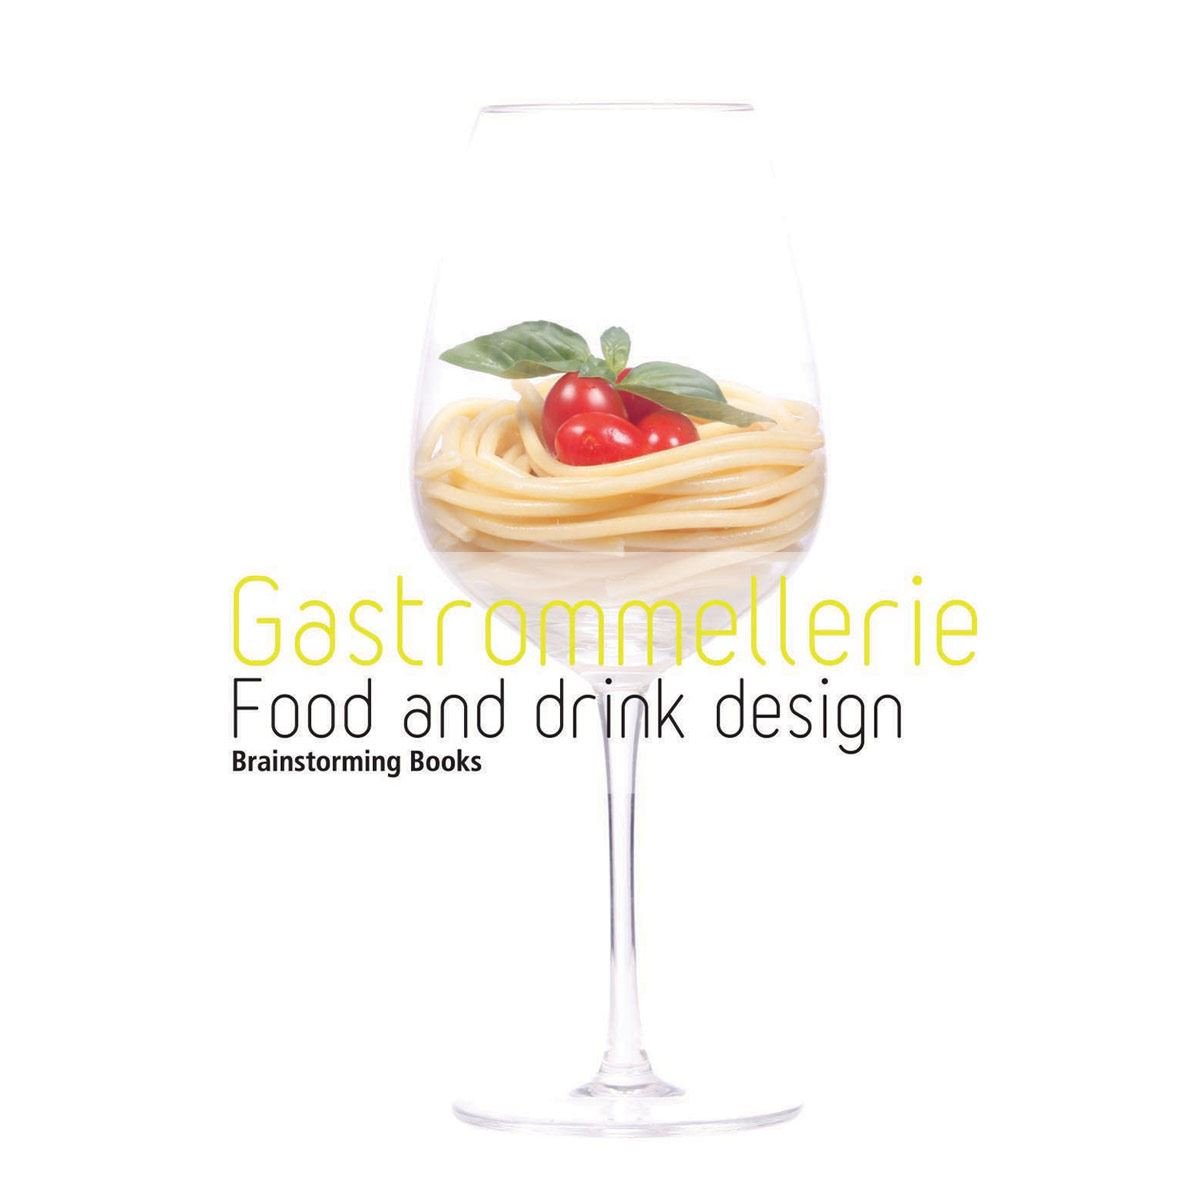 Gastrommellerie, food and drink